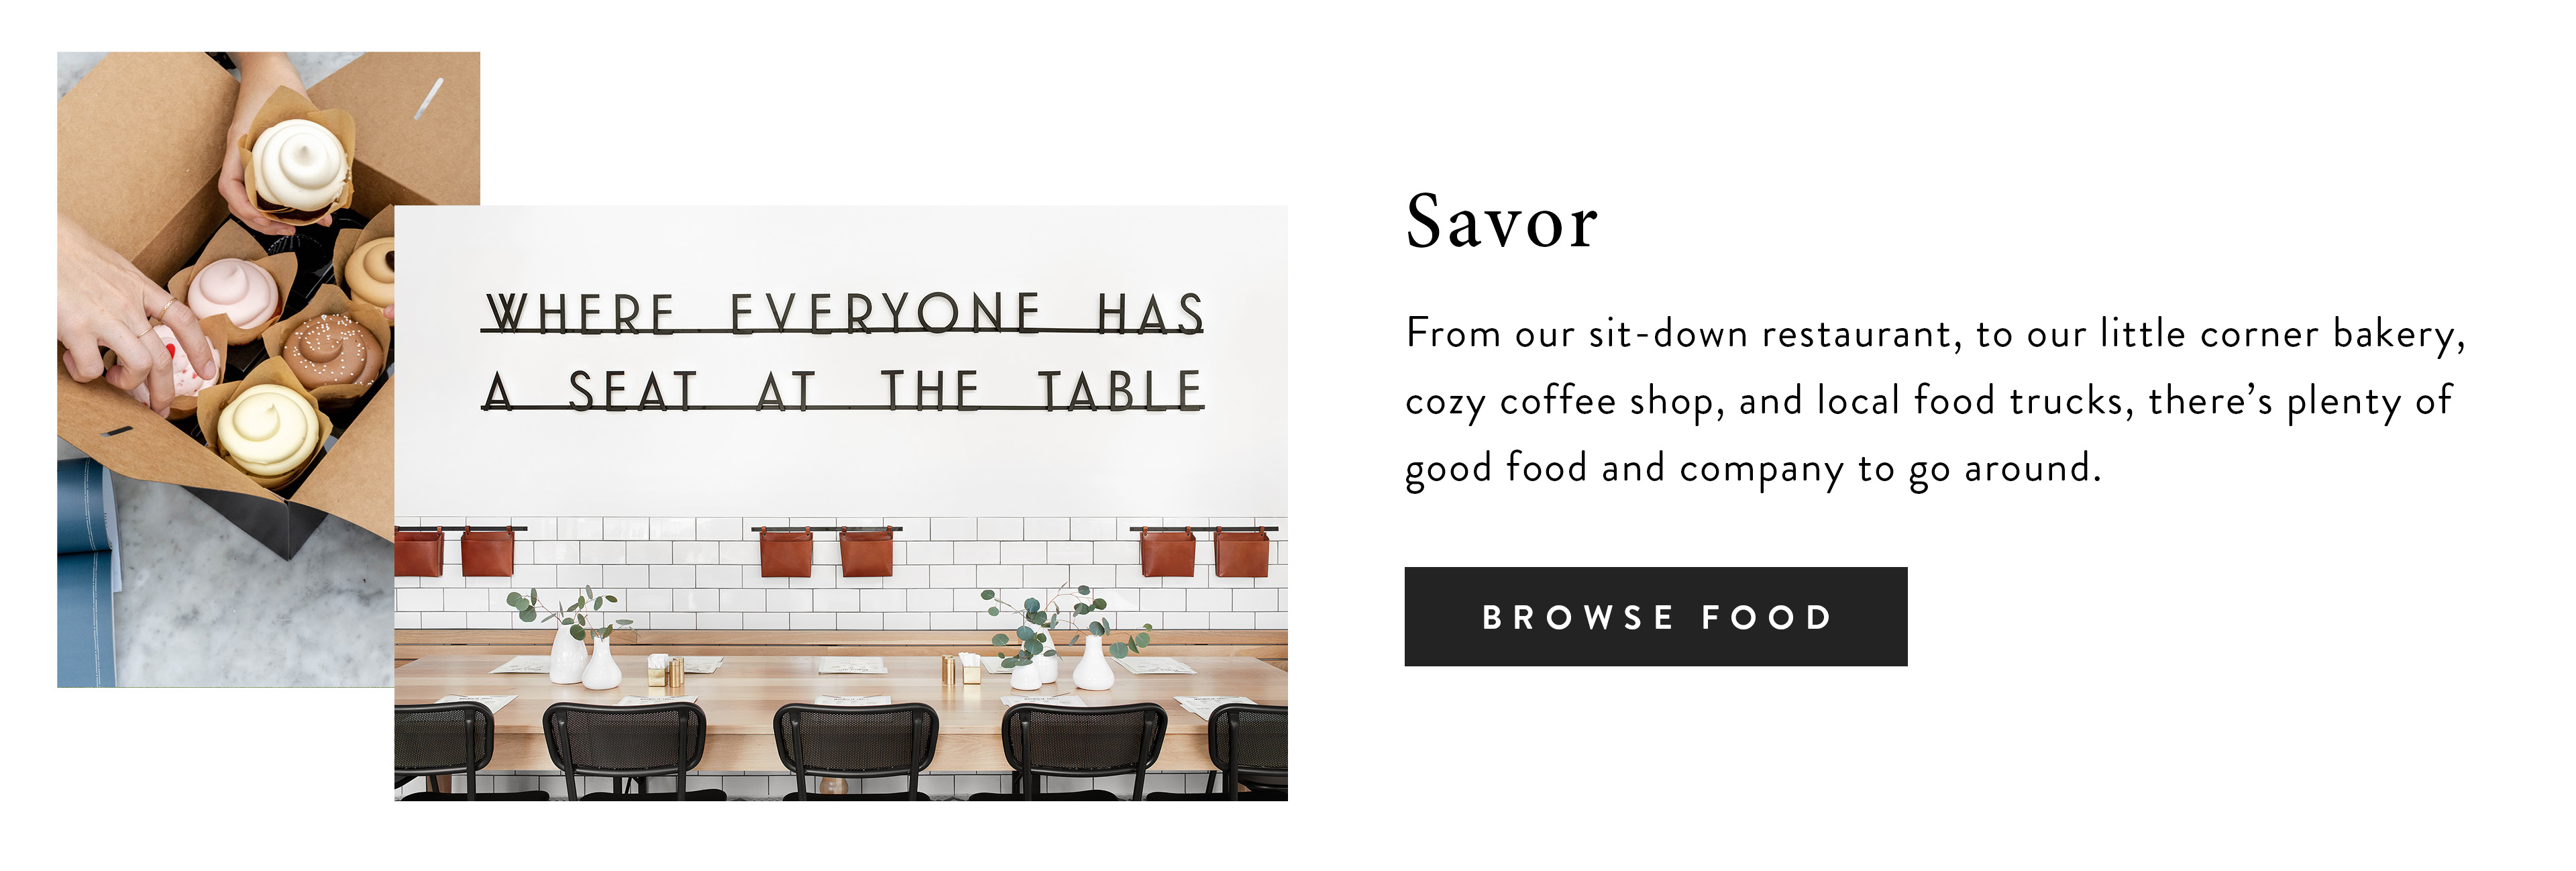 Savor - from our sit-down restaurant, to our little corner bakery, cozy coffee shop, and local food trucks, there's plenty of good food and company to go around. Browse Food. 